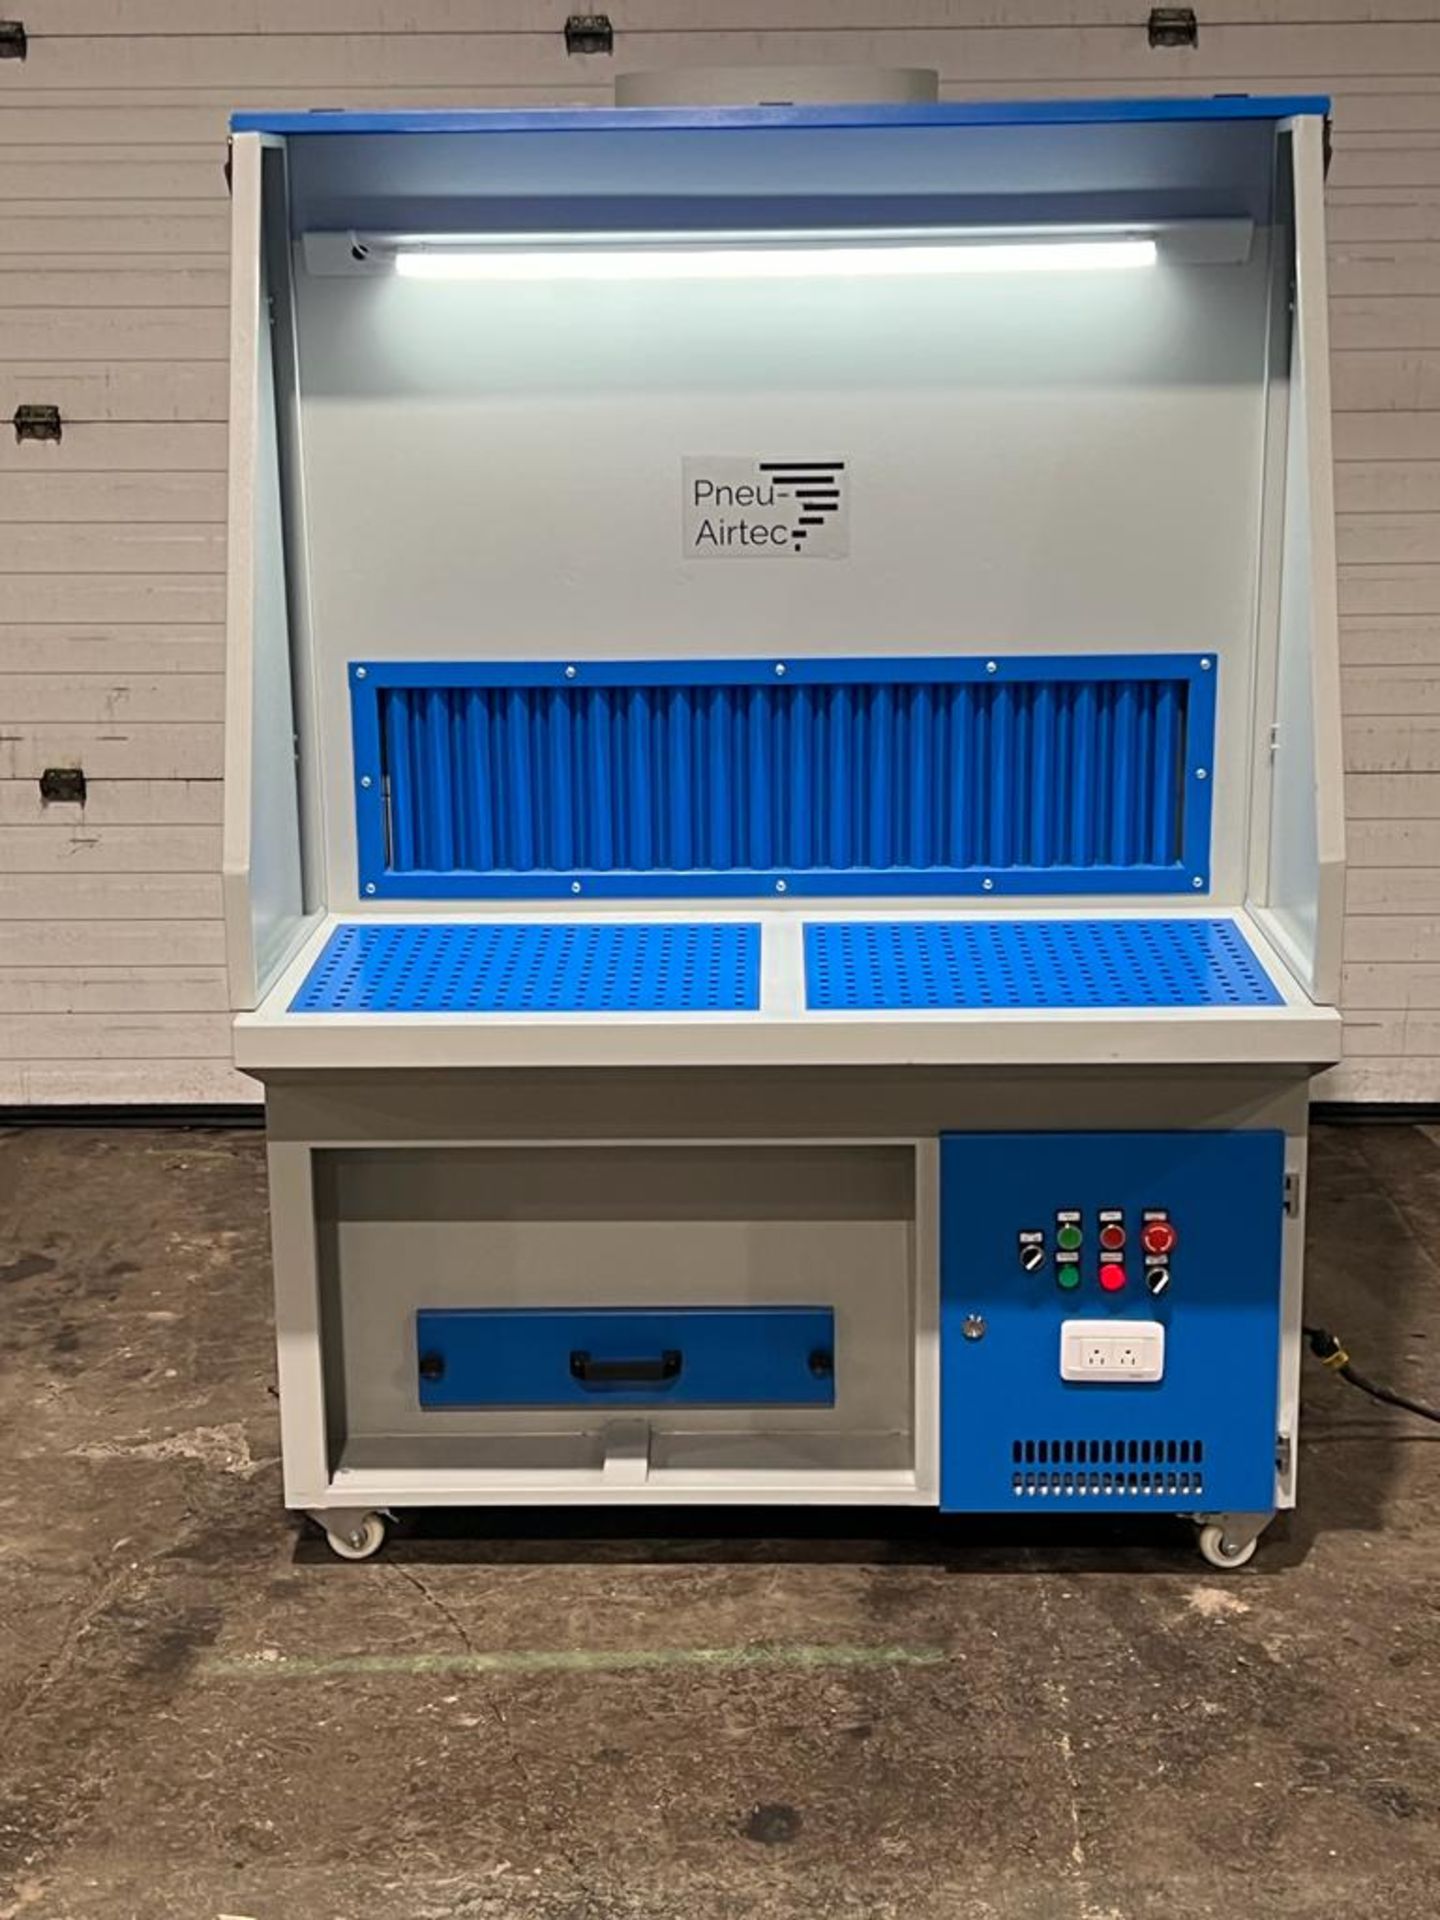 NEW Pneu-Airtec Fume Extracting Downdraft Work Table - 2.2KW 110V 1 Phase Unit with Light